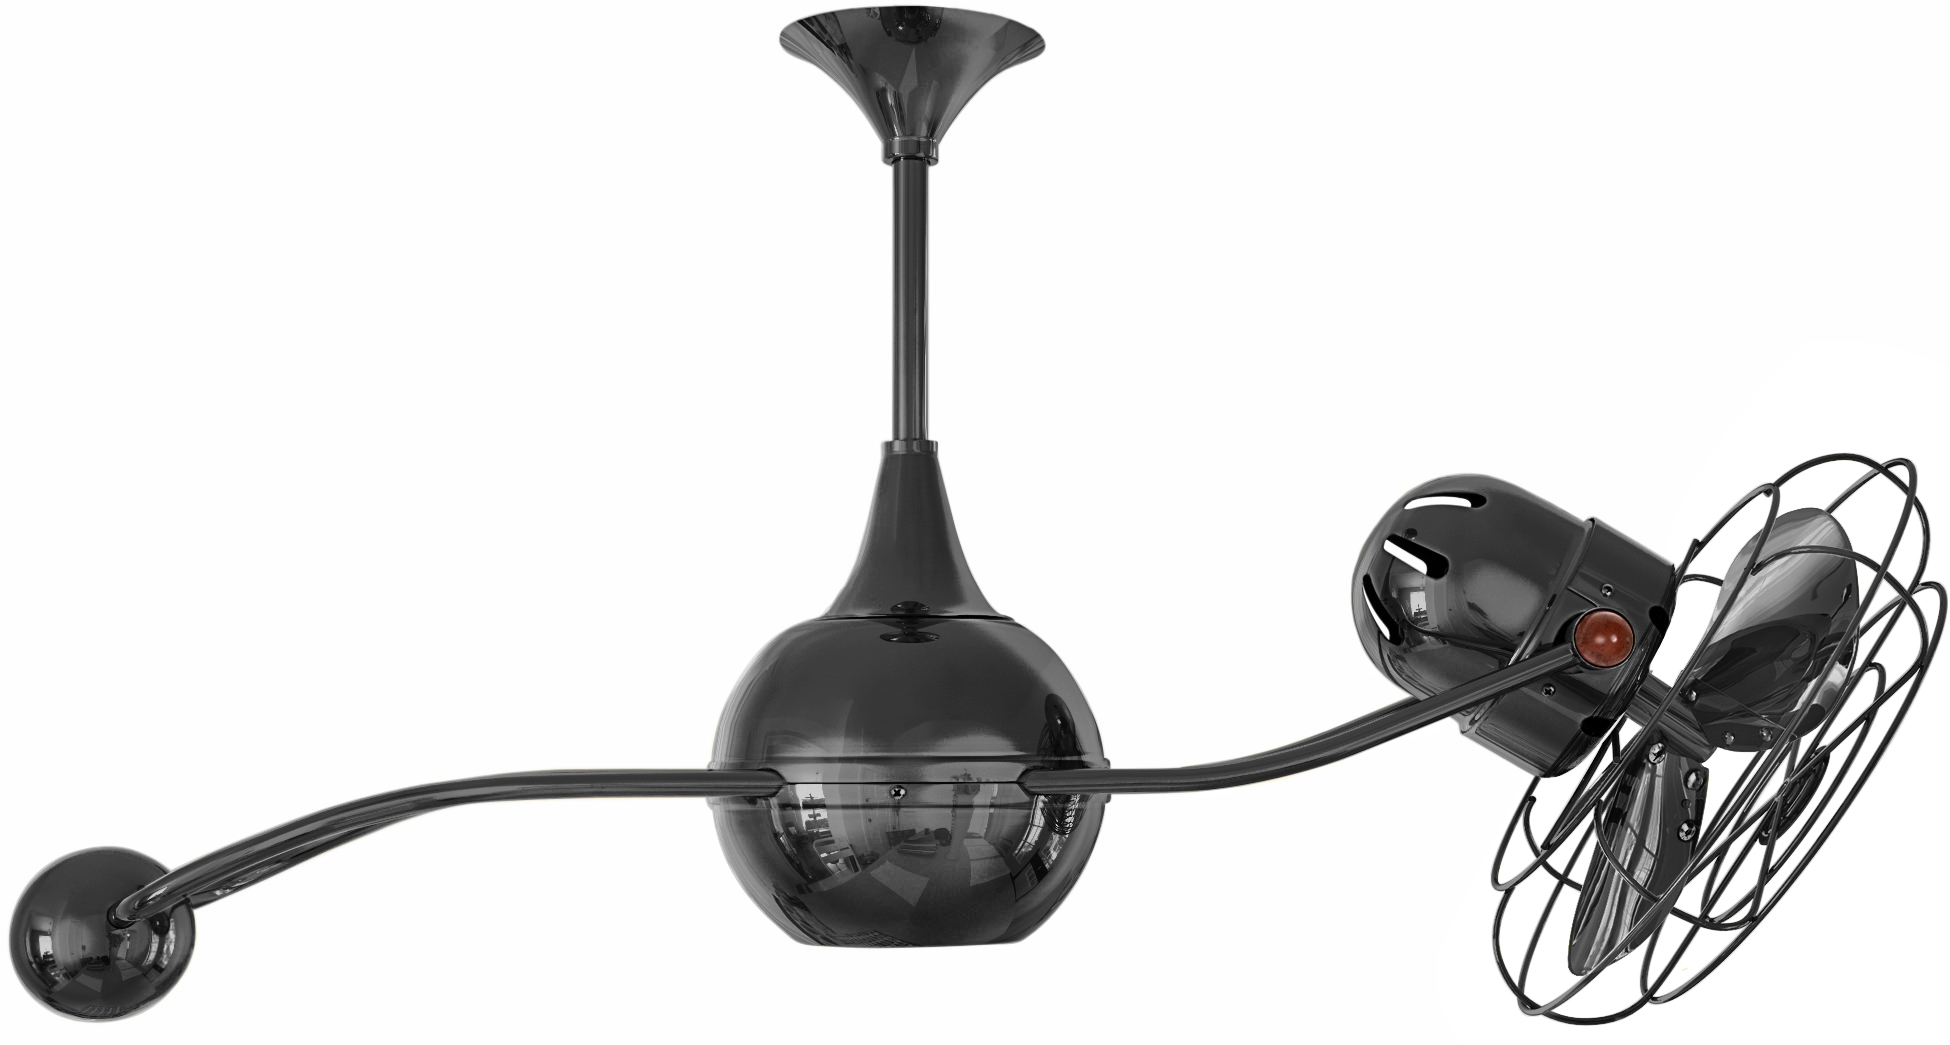 Brisa 2000 ceiling fan in black nickel finish with metal blades in decorative cage made by Matthews Fan Company.